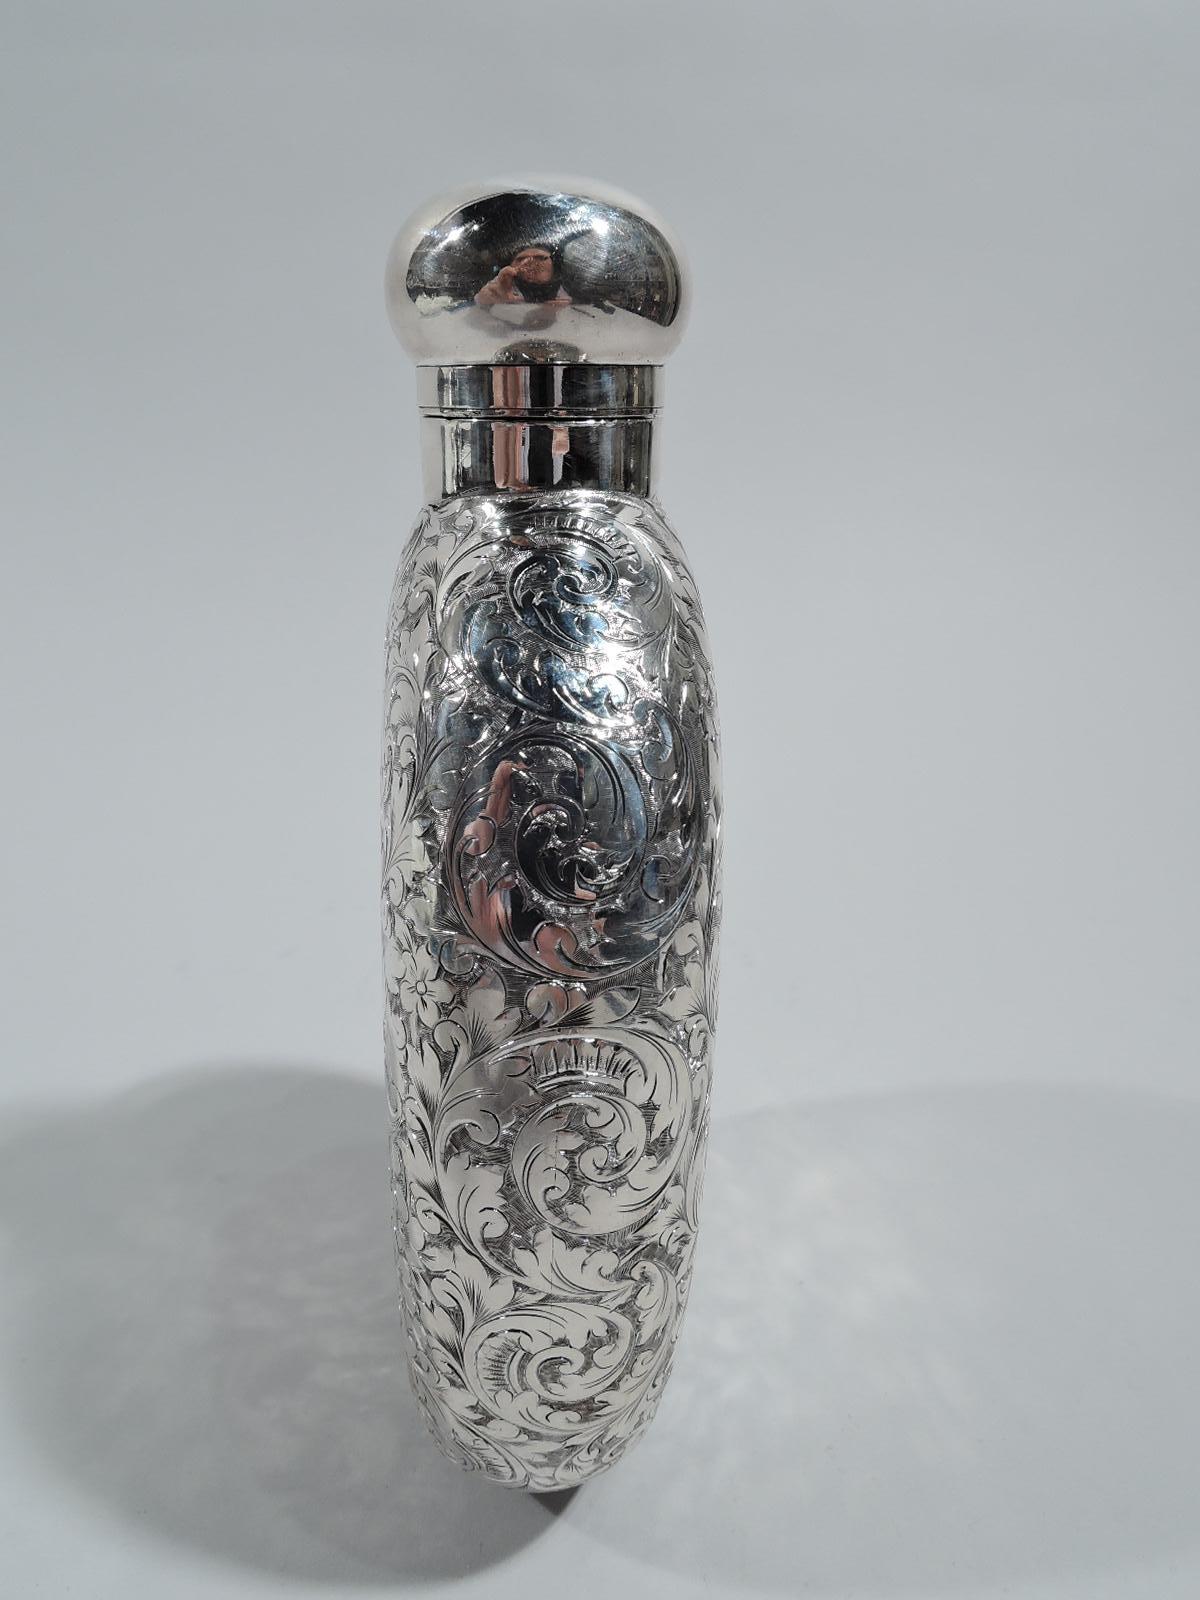 Victorian sterling silver flask. Made by Elkington & Co. in Birmingham in 1892. Ovoid with flat sides. Dense and allover leafy scrolls. On front armorial frame engraved with interlaced monogram. Hinged and cork-lined ball cover. Fully marked.